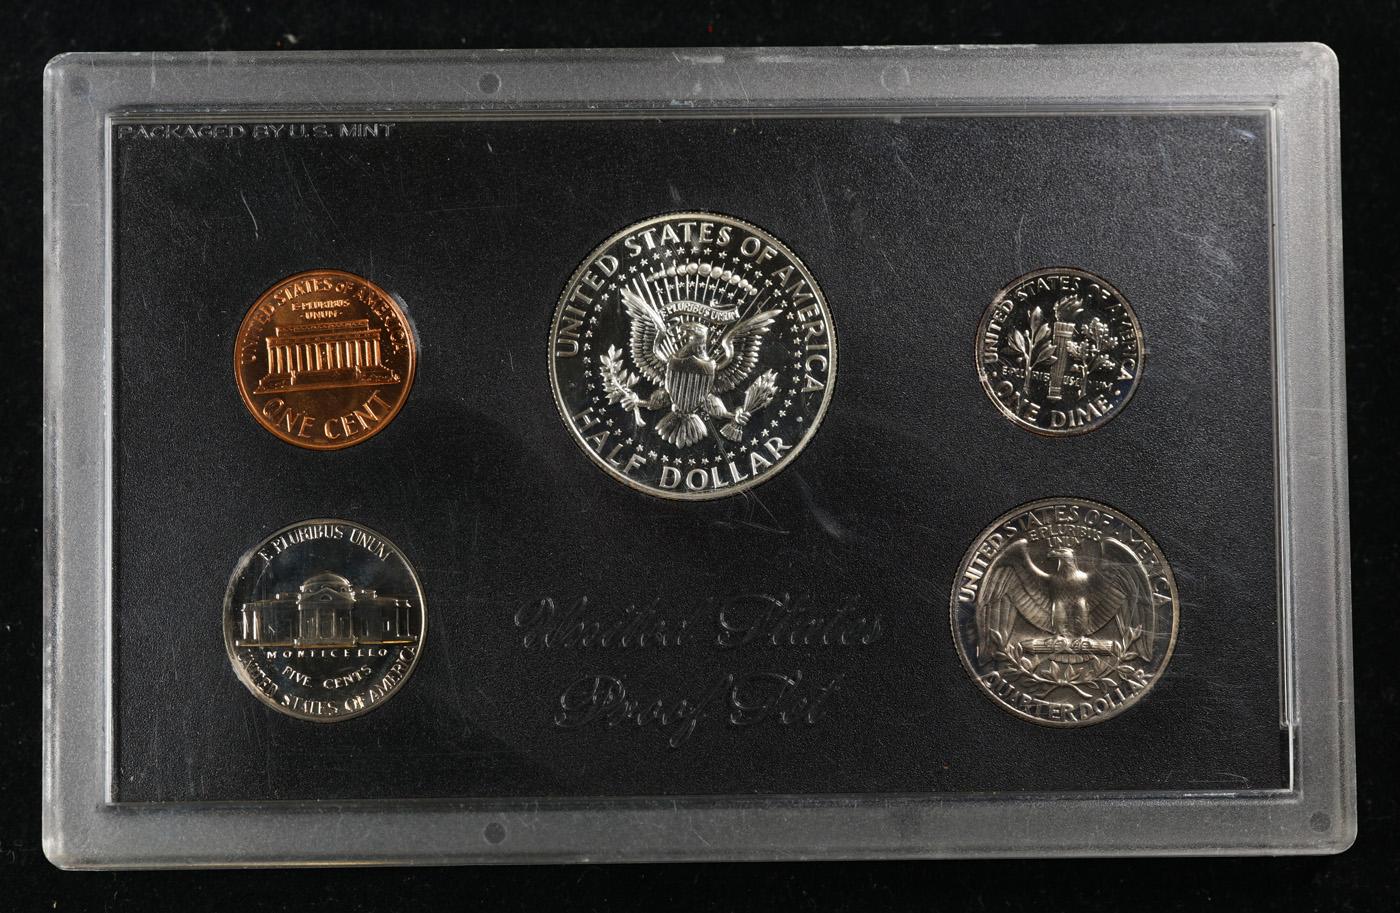 1968 United States Mint Proof Set 5 Coins - No Outer Box